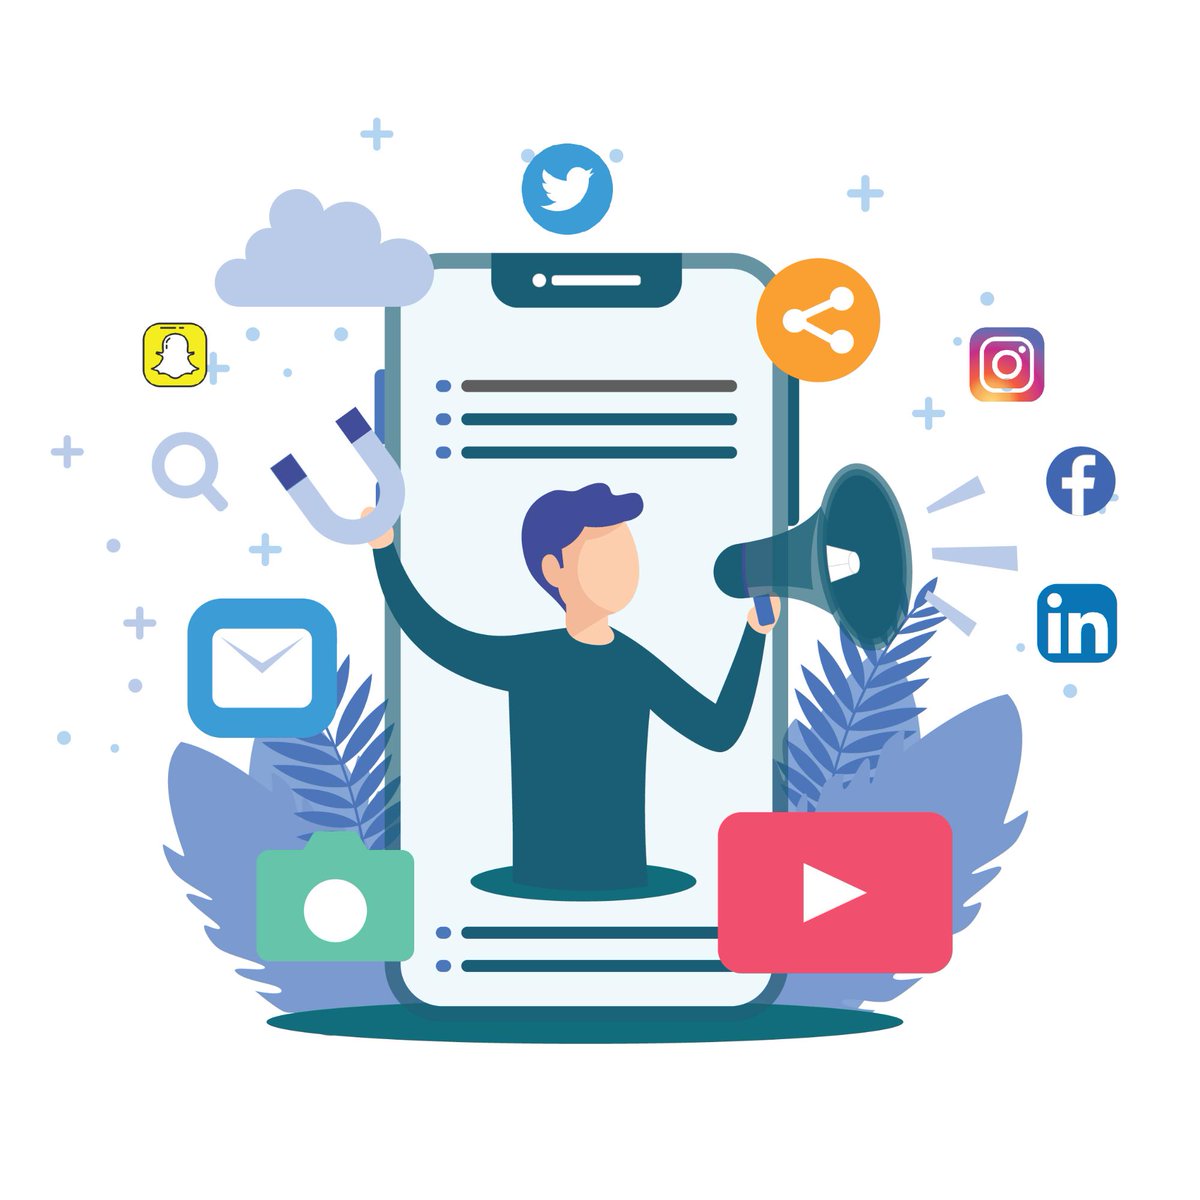 Create demand for your products and services long before your target audience is faced with a buying decision. With a strong social strategy, you build trust and brand loyalty with your customers. bit.ly/2PBdu5d #socialstrategy #socialmediamarketing